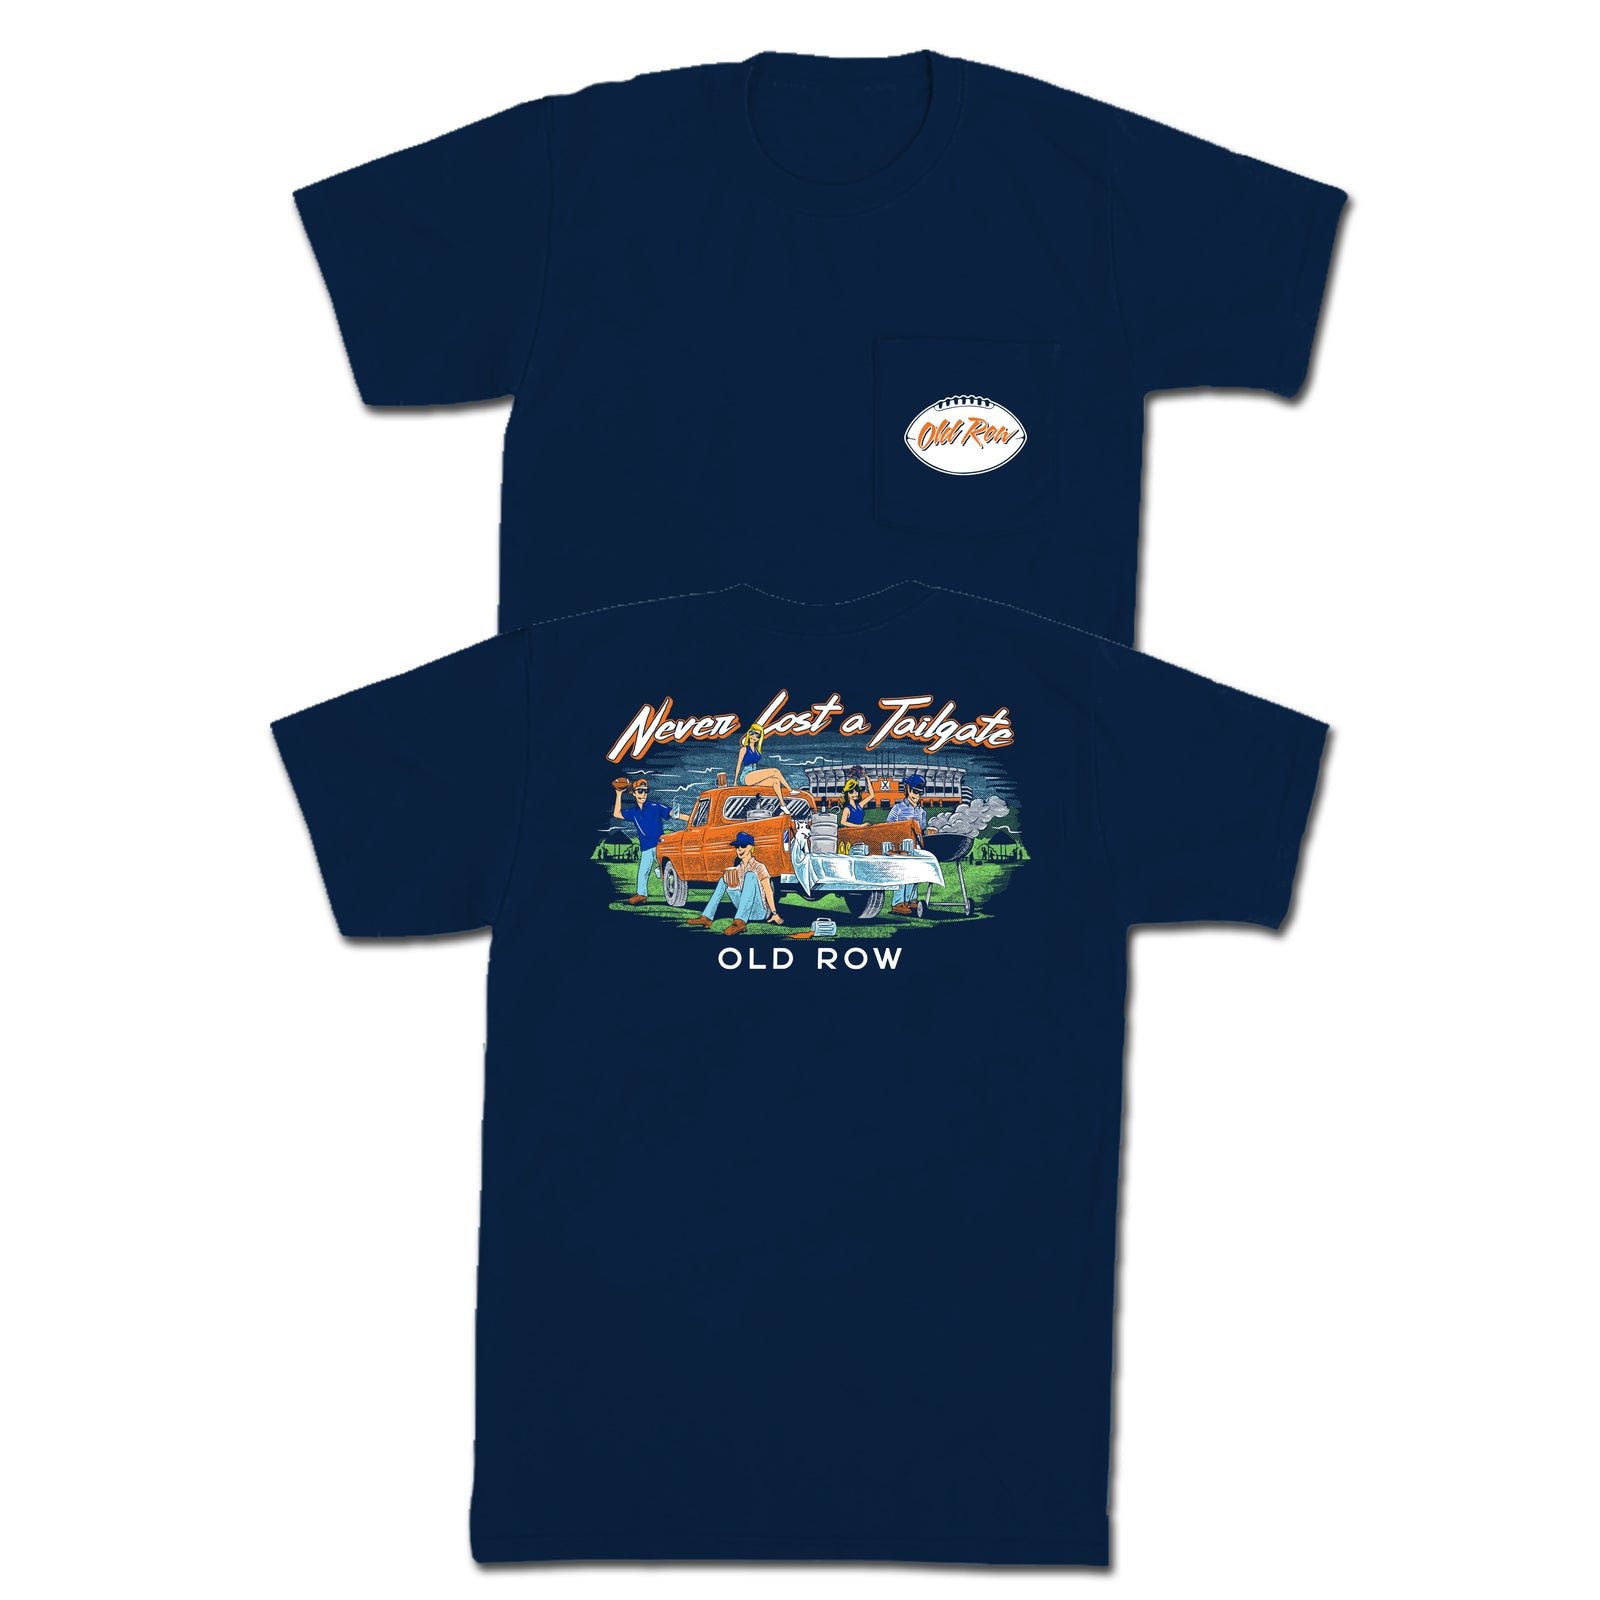 Never Lost A Tailgate Tiger Town, AL Pocket Tee